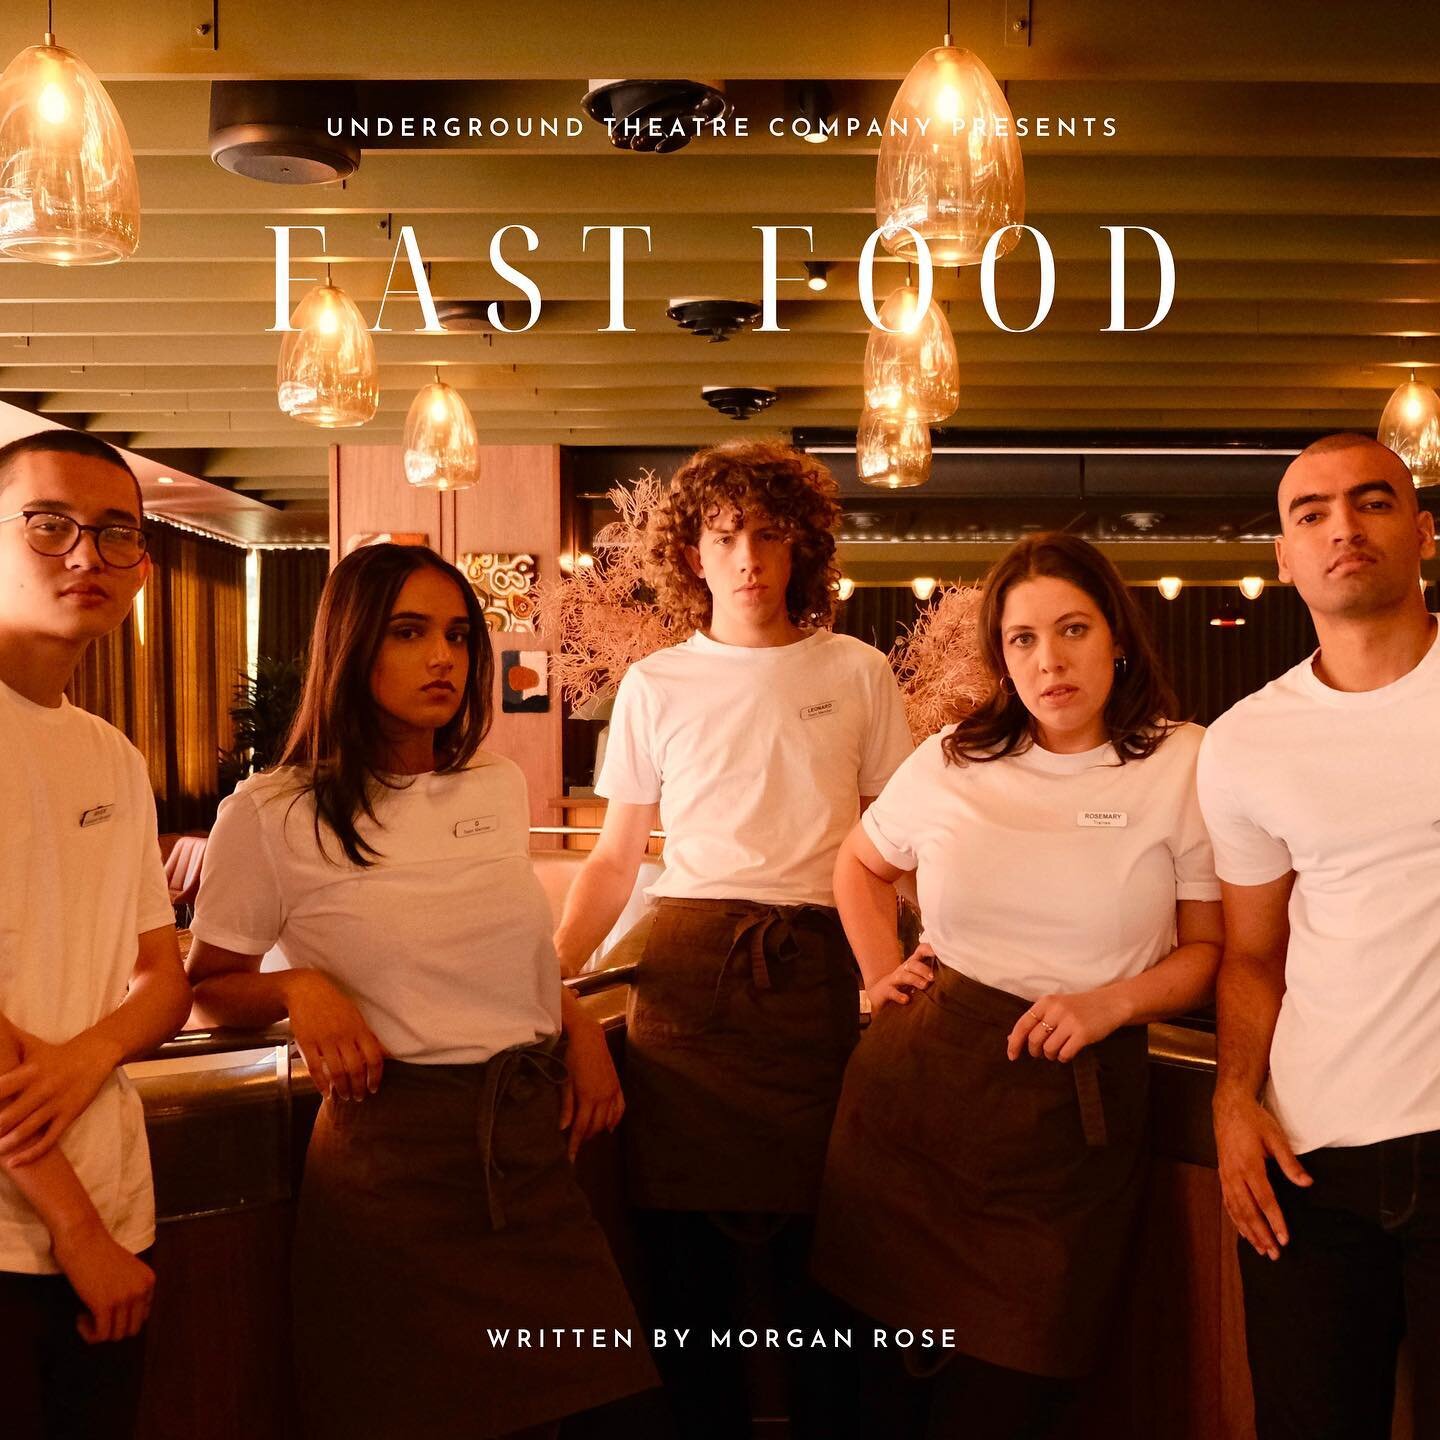 ✨ 5 DAYS TO GO ✨

Get ready to flip the burg&rsquo; at the fast food industry 🖕🏼🍔

Underground Theatre Company is proud to present FAST FOOD by Morgan Rose &amp; Directed by Grace Wilson @anywherefest

📍Join us at UQ Union Complex, Main Course. 
